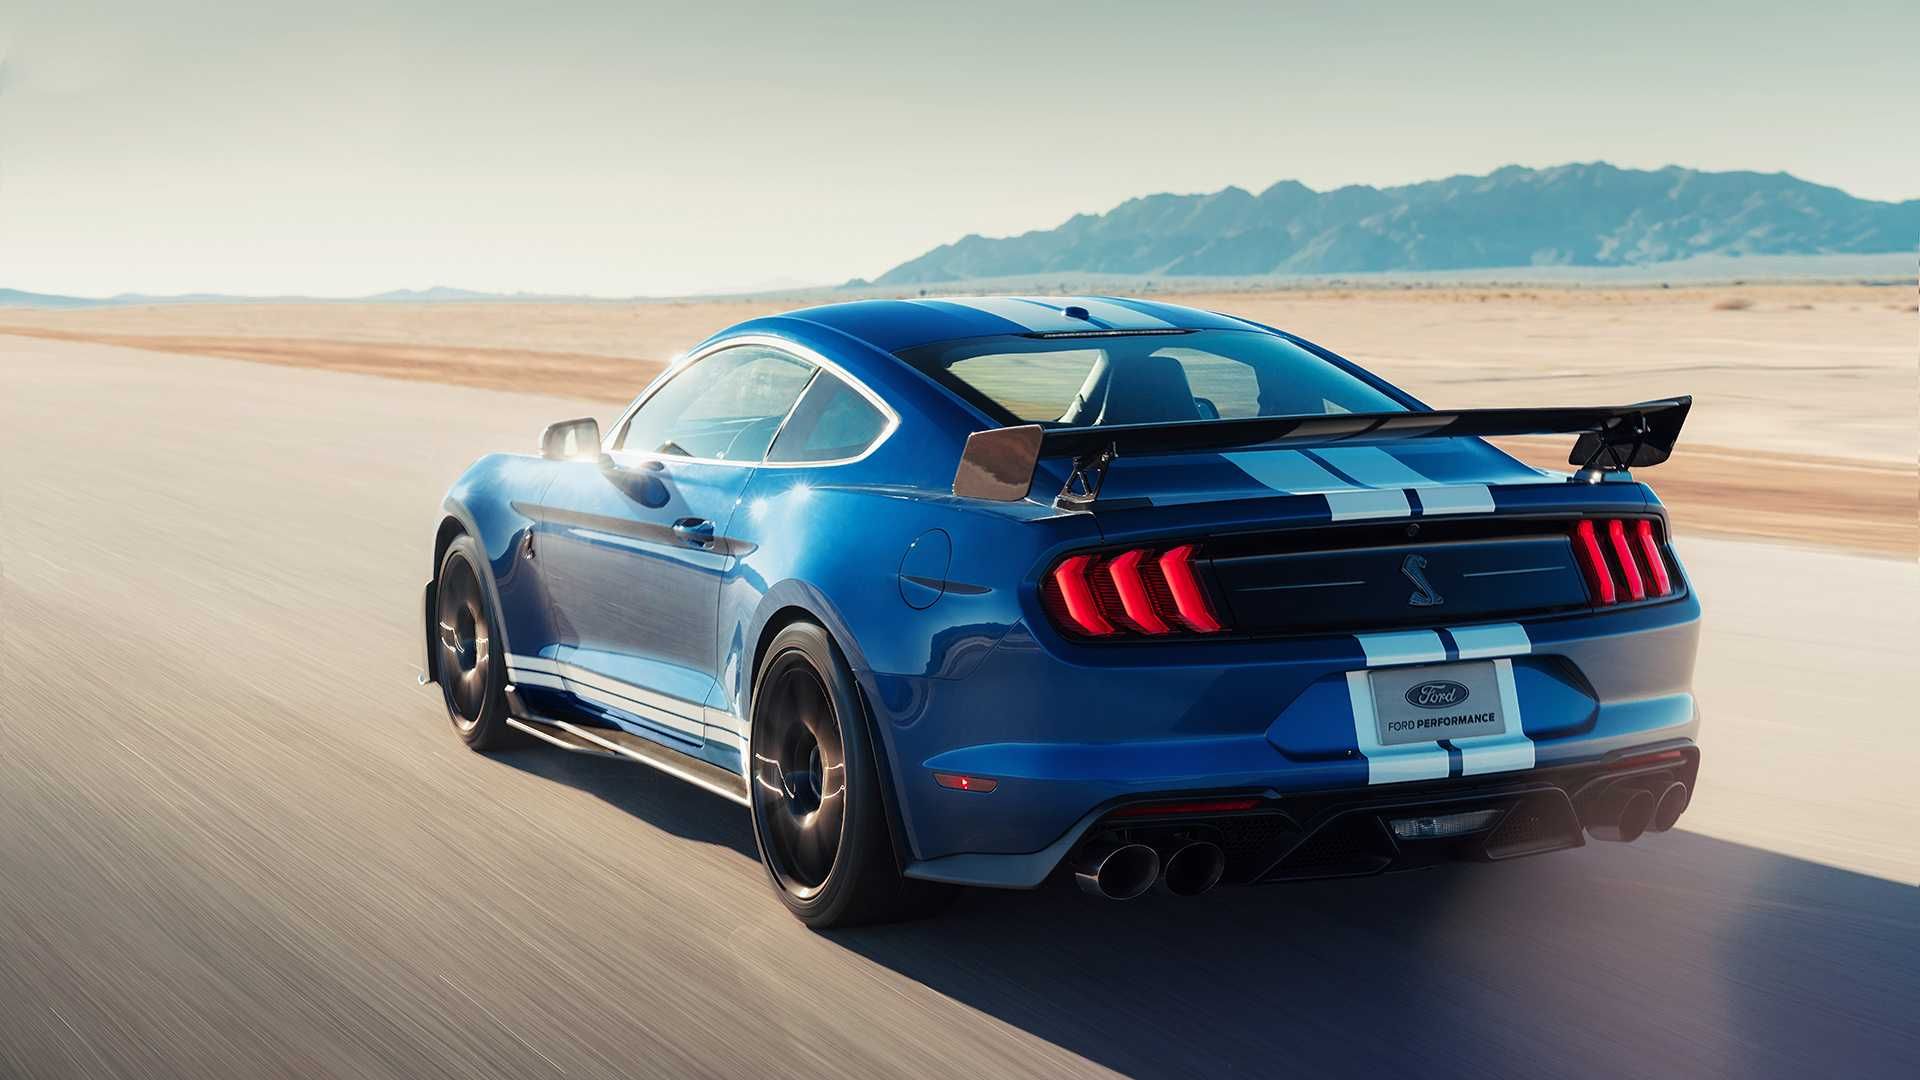 2020 Mustang Shelby GT500 rear end